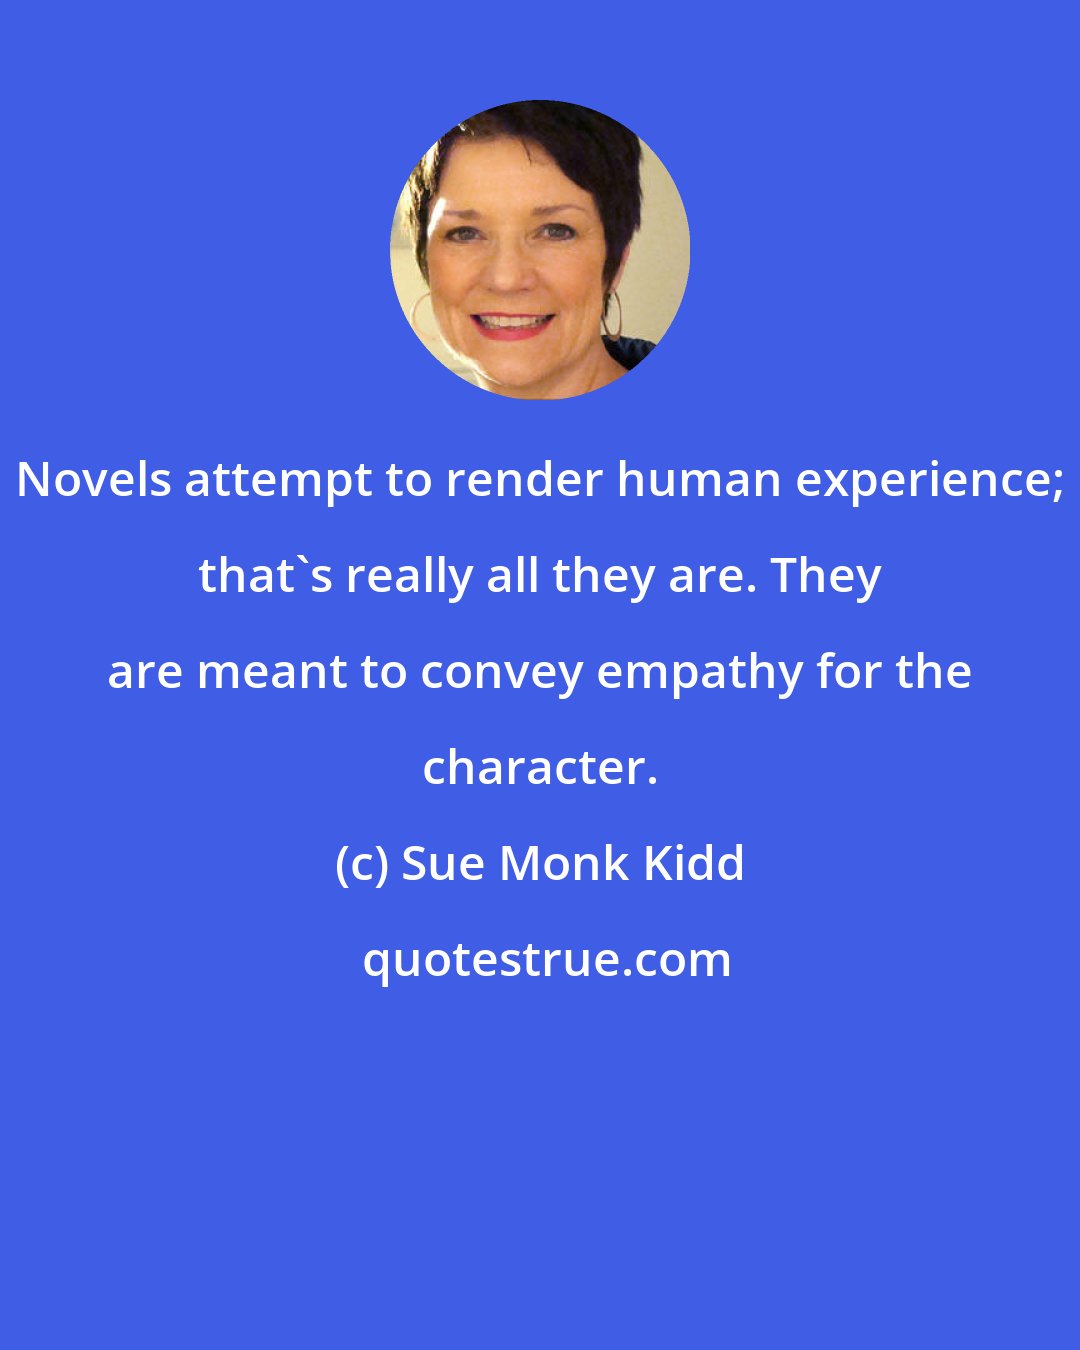 Sue Monk Kidd: Novels attempt to render human experience; that's really all they are. They are meant to convey empathy for the character.